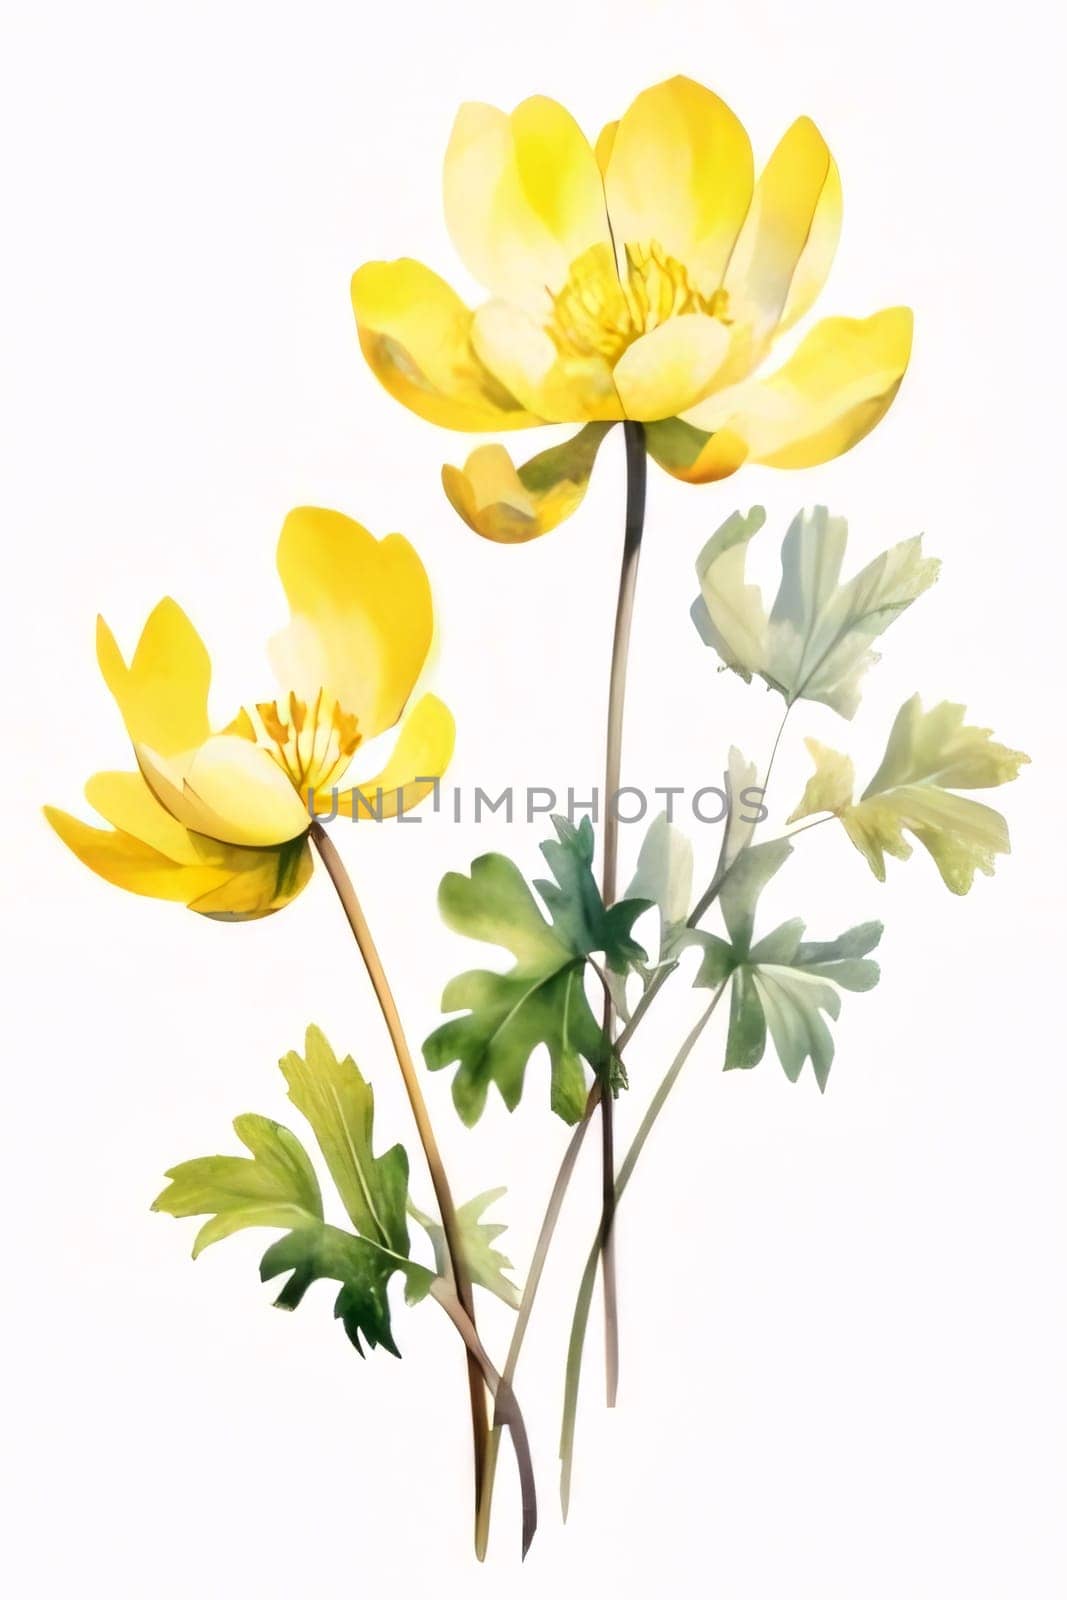 Drawn, painted image yellow flowers on isolated white background. Flowering flowers, a symbol of spring, new life. by ThemesS